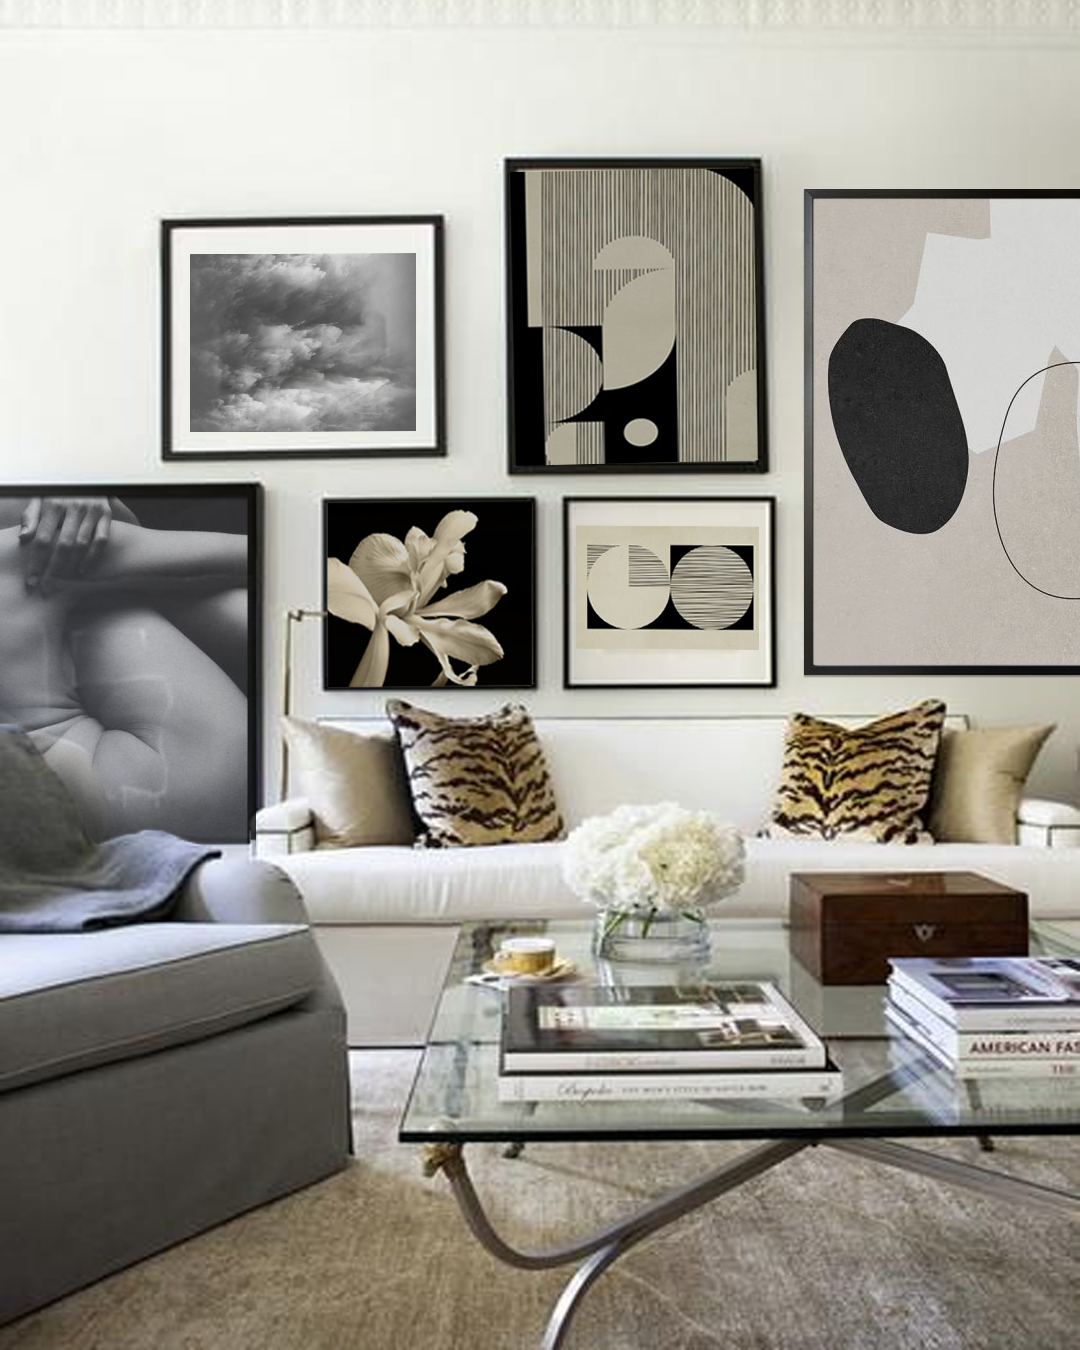 ABSTRACT BLACK AND WHITE ART WALL - Artdesign